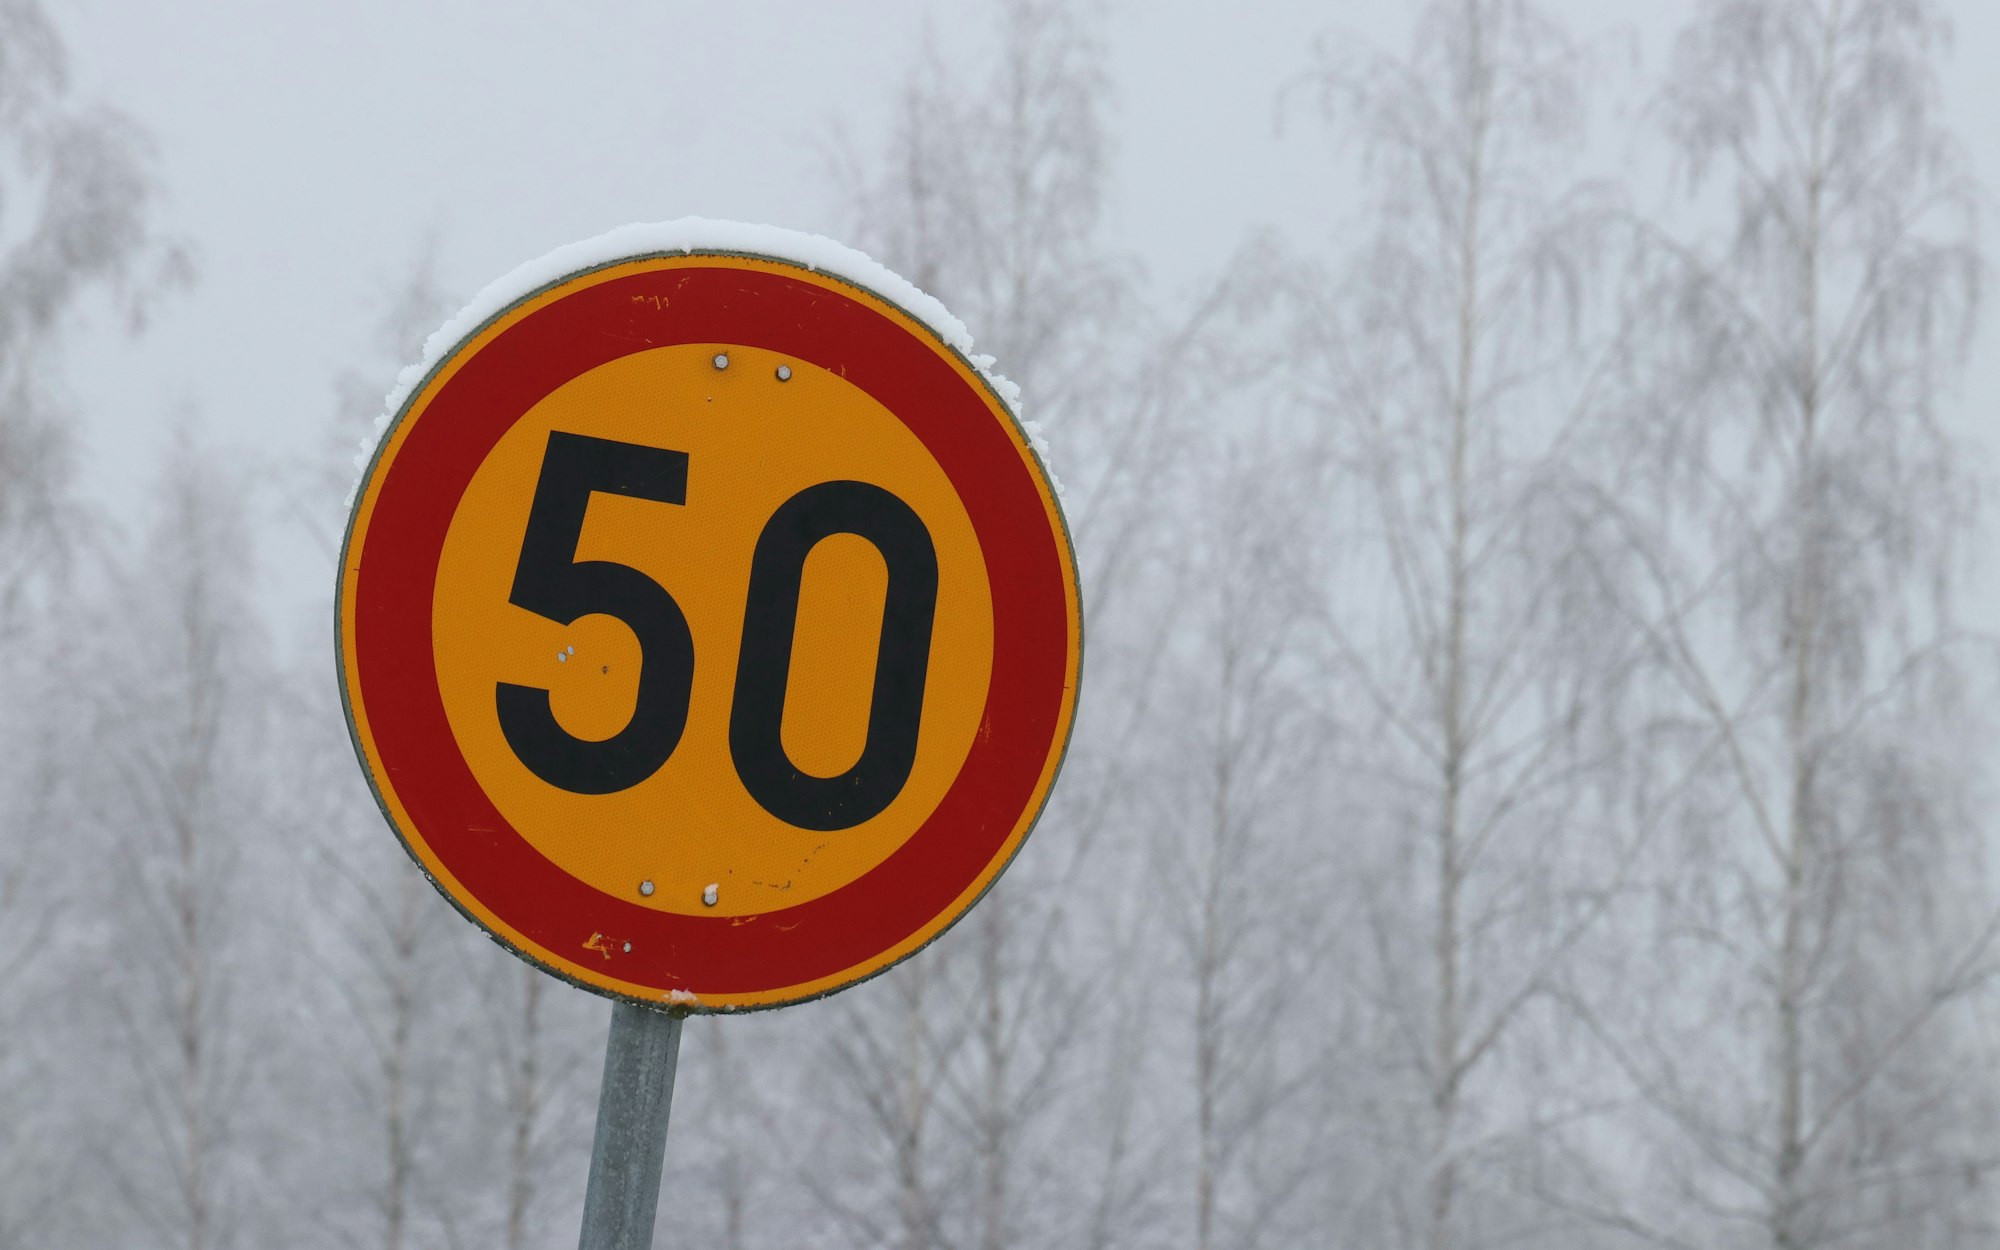 A yellow street sign reads "50" in a snowy forest.